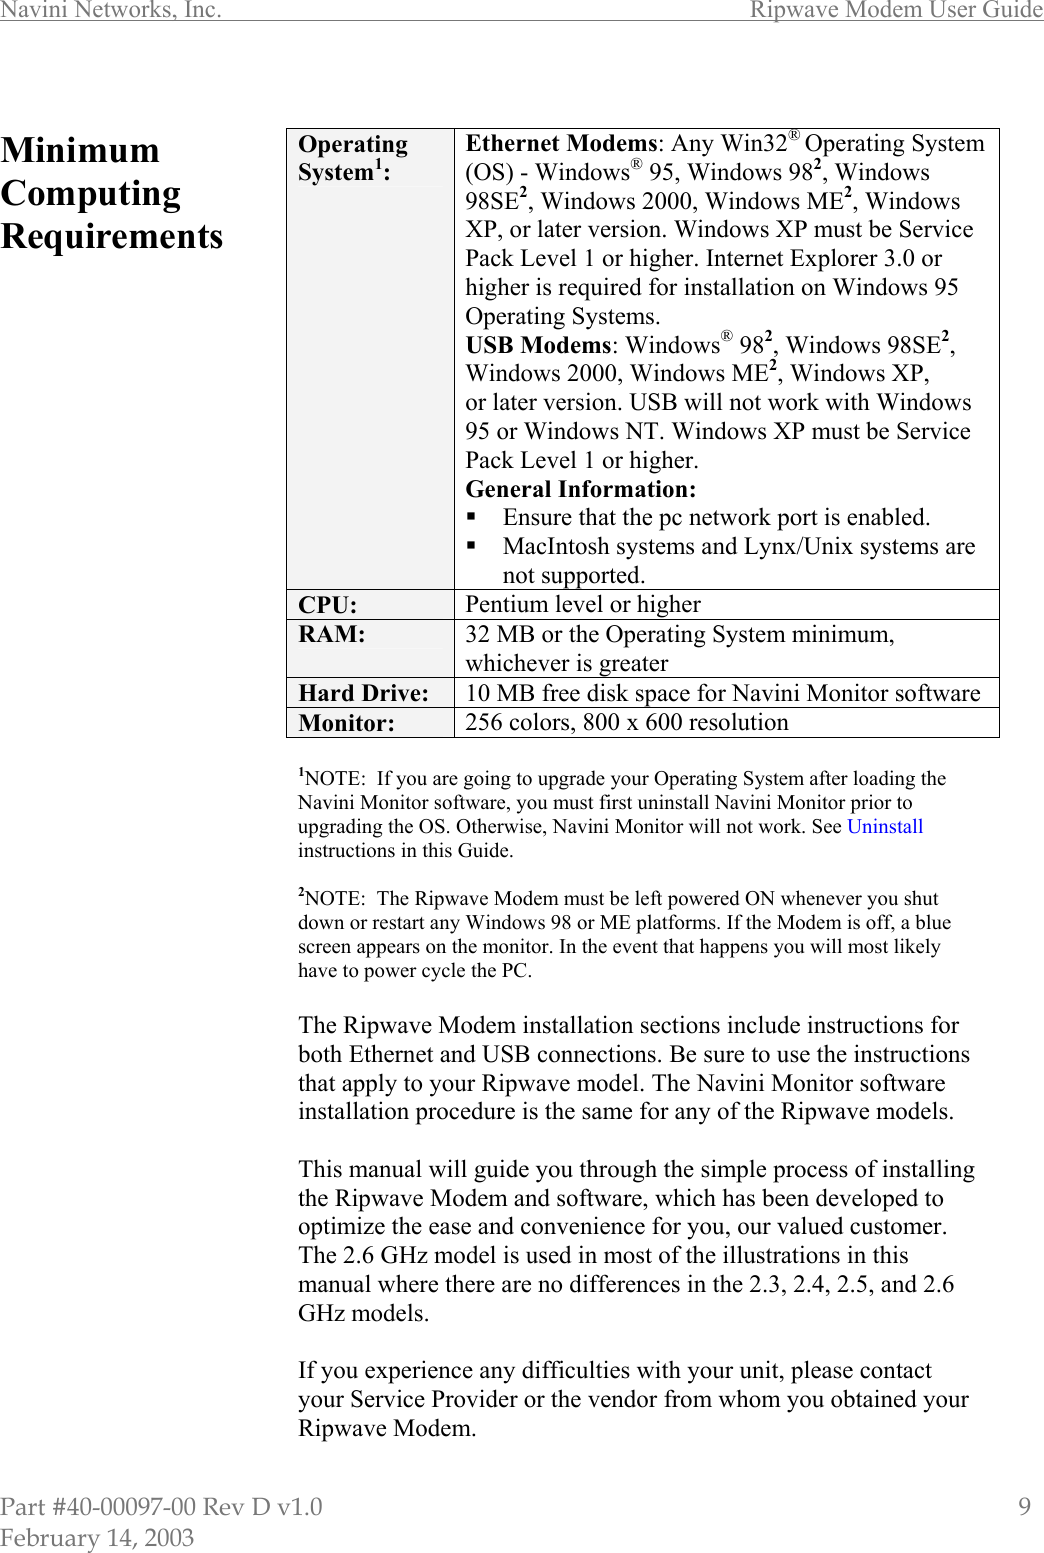 Navini Networks, Inc.        Ripwave Modem User Guide Part #40-00097-00 Rev D v1.0                         9 February 14, 2003  Minimum Computing Requirements                                           Operating System1: Ethernet Modems: Any Win32® Operating System (OS) - Windows® 95, Windows 982, Windows 98SE2, Windows 2000, Windows ME2, Windows XP, or later version. Windows XP must be Service Pack Level 1 or higher. Internet Explorer 3.0 or higher is required for installation on Windows 95 Operating Systems. USB Modems: Windows® 982, Windows 98SE2, Windows 2000, Windows ME2, Windows XP, or later version. USB will not work with Windows 95 or Windows NT. Windows XP must be Service Pack Level 1 or higher. General Information:  Ensure that the pc network port is enabled.  MacIntosh systems and Lynx/Unix systems are not supported. CPU:  Pentium level or higher RAM:  32 MB or the Operating System minimum, whichever is greater Hard Drive:  10 MB free disk space for Navini Monitor software Monitor:  256 colors, 800 x 600 resolution   1NOTE:  If you are going to upgrade your Operating System after loading the Navini Monitor software, you must first uninstall Navini Monitor prior to upgrading the OS. Otherwise, Navini Monitor will not work. See Uninstall instructions in this Guide.  2NOTE:  The Ripwave Modem must be left powered ON whenever you shut down or restart any Windows 98 or ME platforms. If the Modem is off, a blue screen appears on the monitor. In the event that happens you will most likely have to power cycle the PC.  The Ripwave Modem installation sections include instructions for both Ethernet and USB connections. Be sure to use the instructions that apply to your Ripwave model. The Navini Monitor software installation procedure is the same for any of the Ripwave models.  This manual will guide you through the simple process of installing the Ripwave Modem and software, which has been developed to optimize the ease and convenience for you, our valued customer. The 2.6 GHz model is used in most of the illustrations in this manual where there are no differences in the 2.3, 2.4, 2.5, and 2.6 GHz models.   If you experience any difficulties with your unit, please contact your Service Provider or the vendor from whom you obtained your Ripwave Modem. 